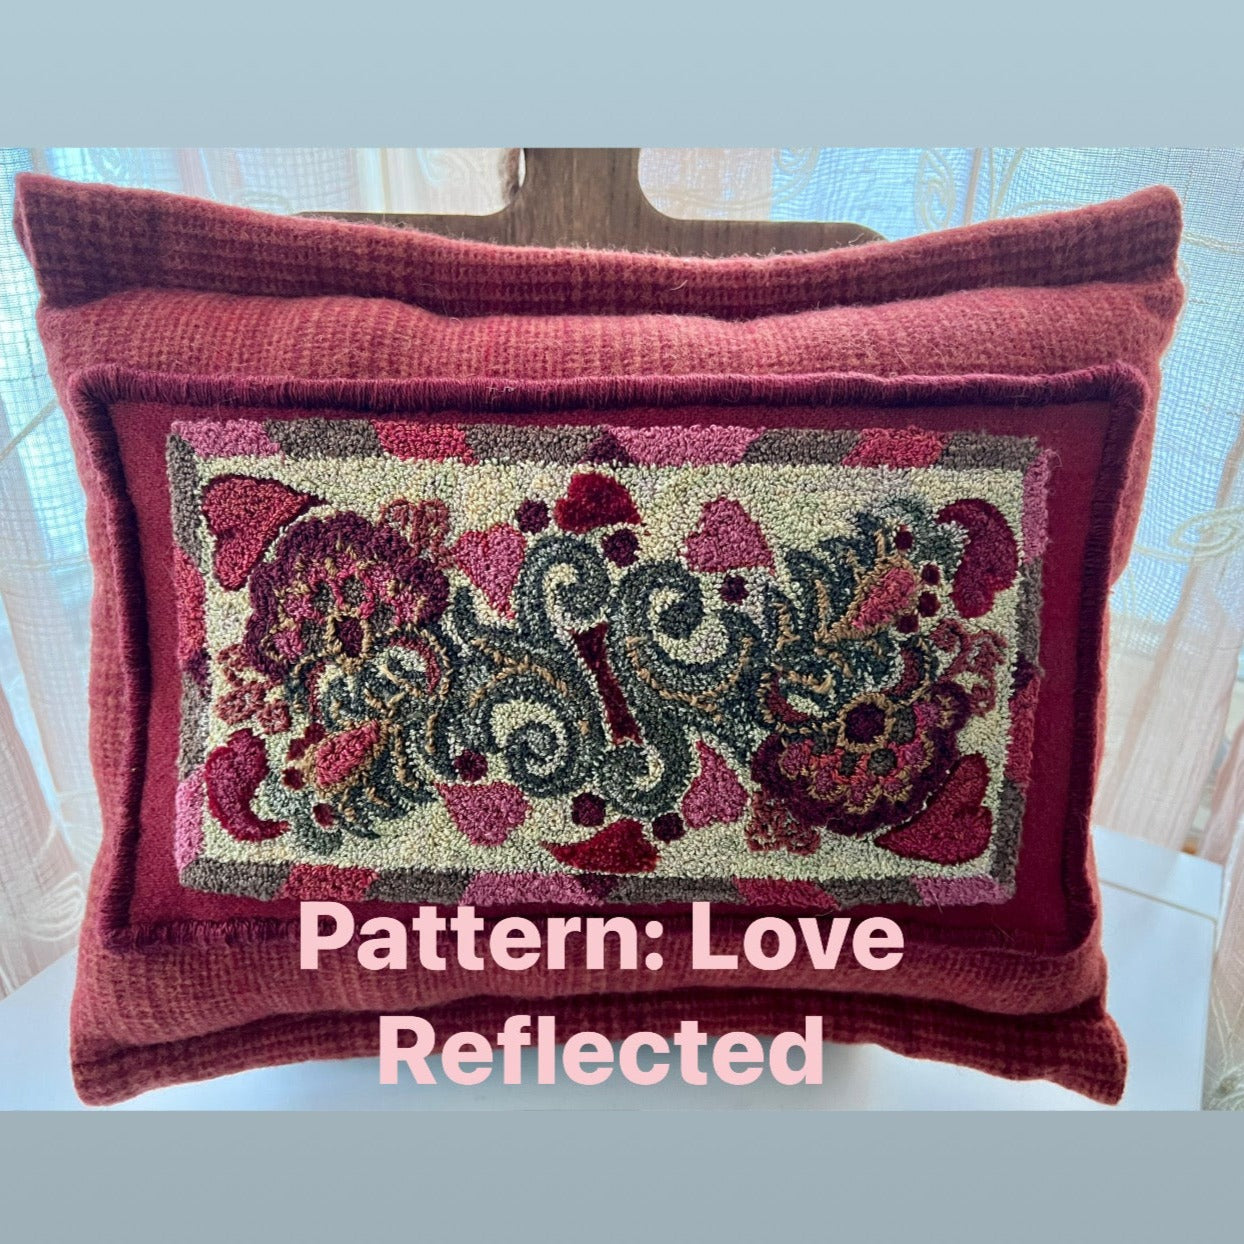  Love Reflected- Punch Needle Pattern by Orphaned Wool. This pattern is available as a paper pattern and as a pattern on weavers cloth. A lovely floral and hearts pattern to everyone to enjoy.